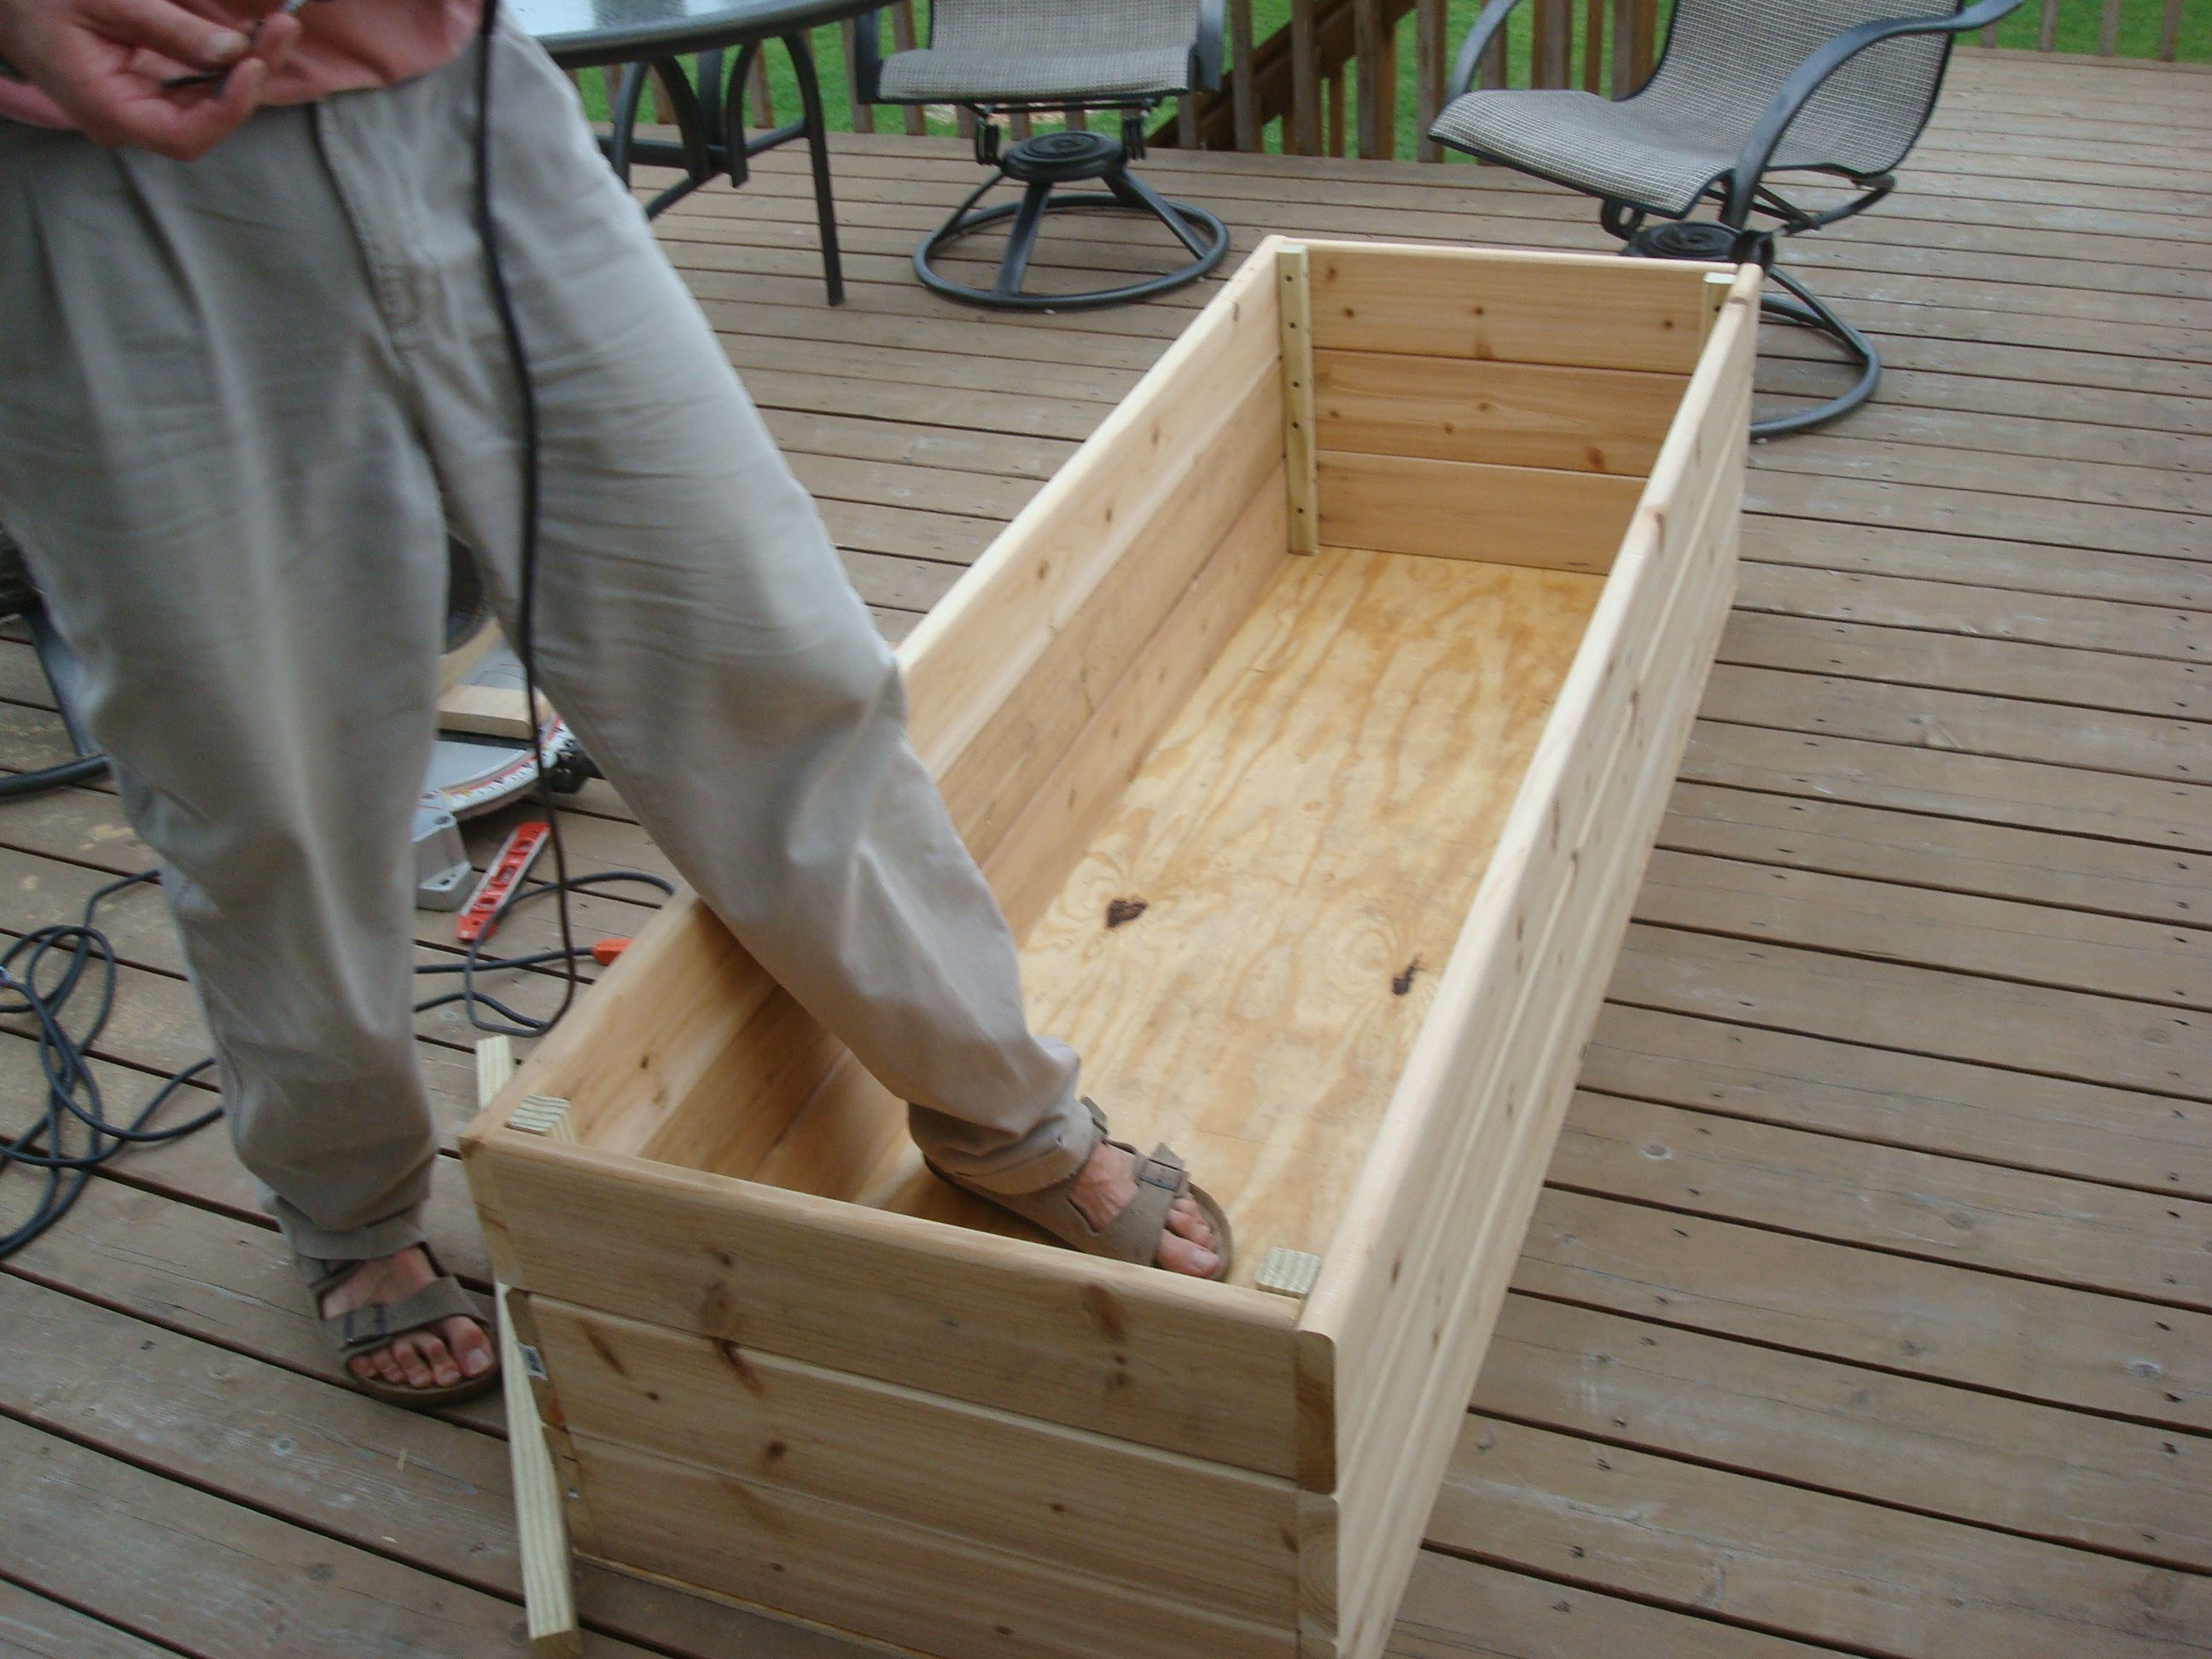 Diy Deck Planter Box Plans Wooden Pdf Adirondack Chair Plans intended for size 2592 X 1944